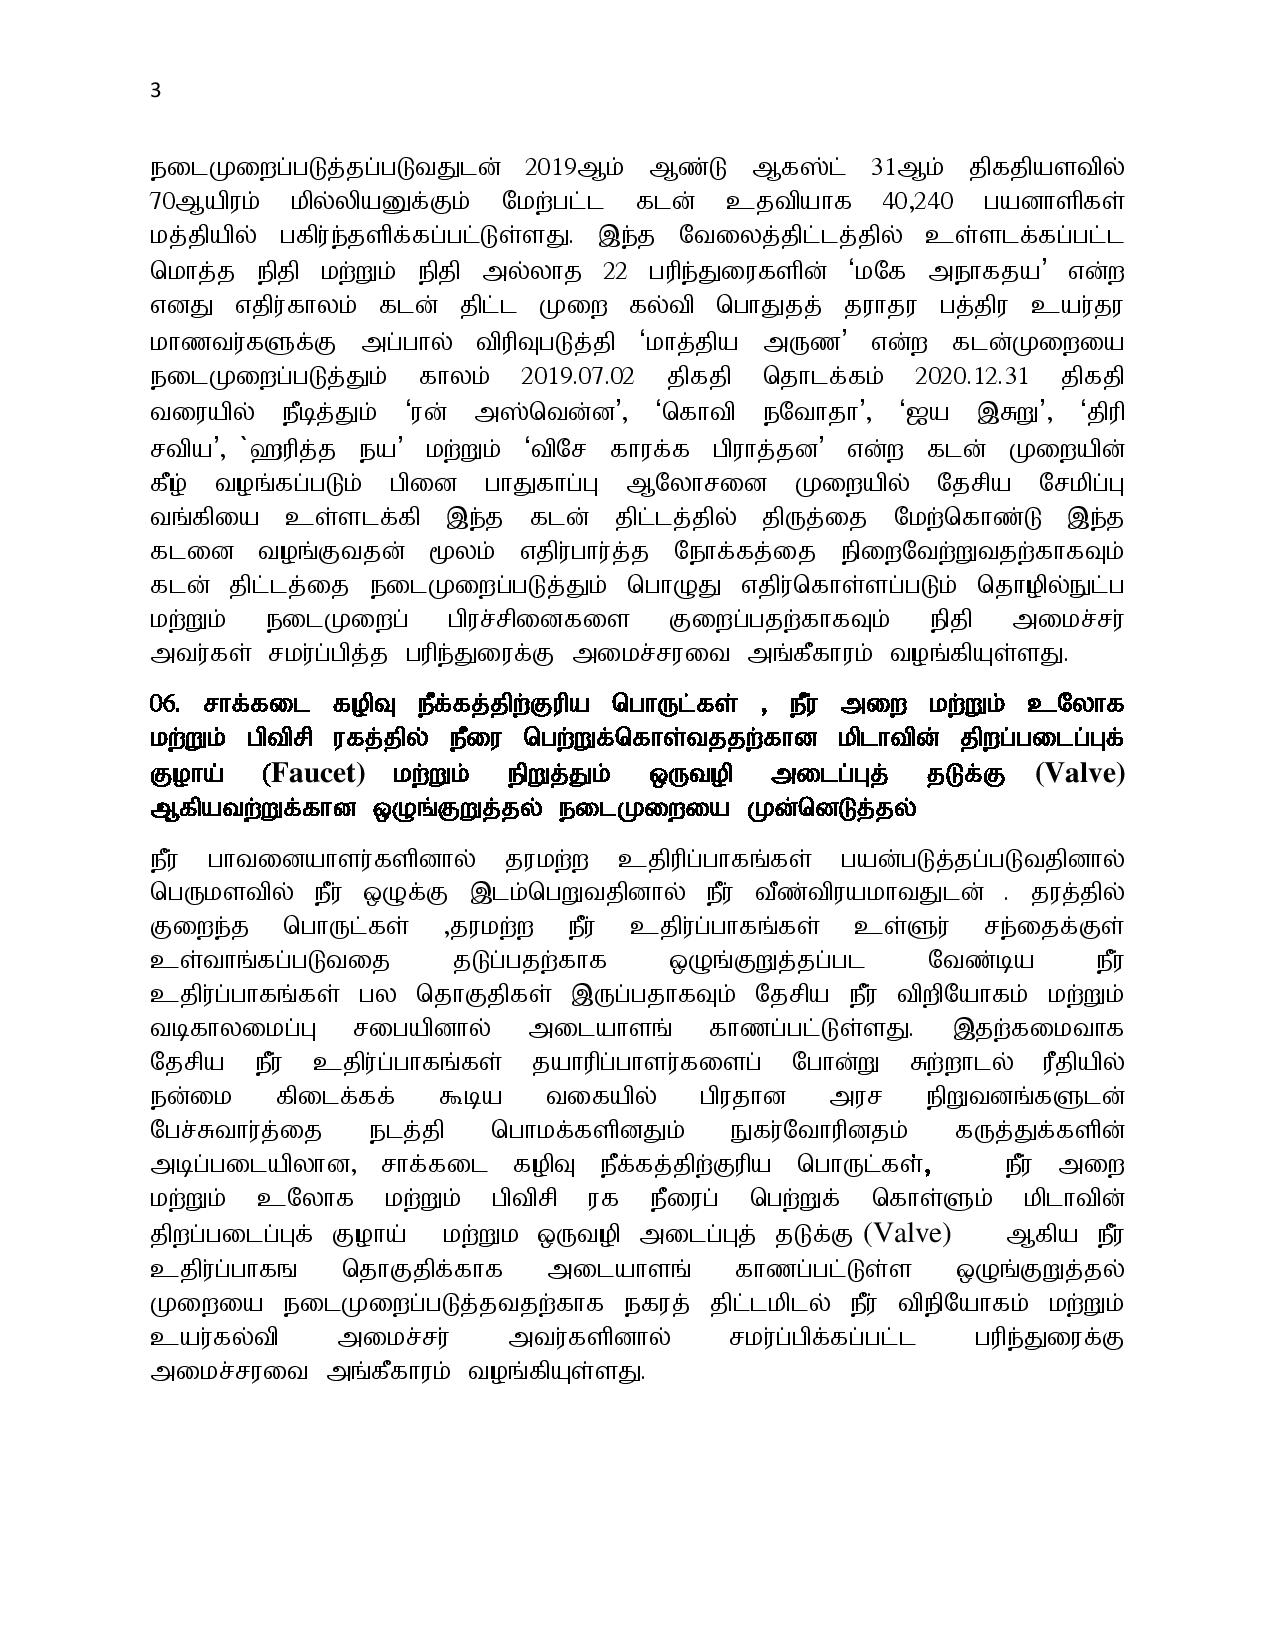 29.10.2019 cabinet tamil page 003